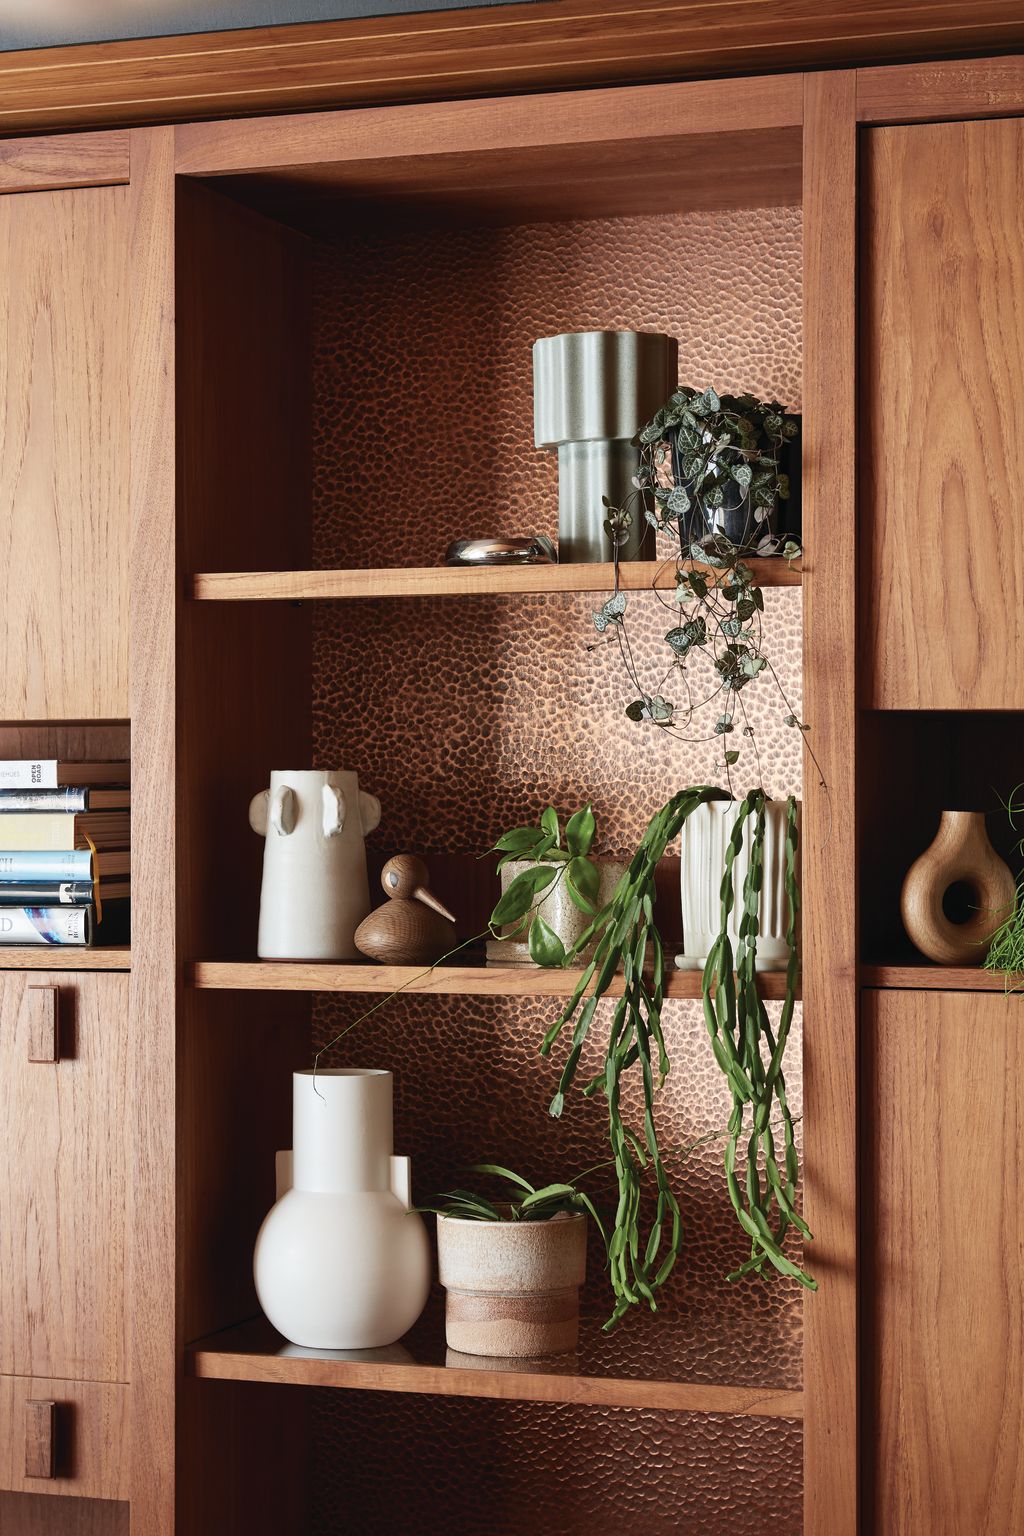 Choose a mix of materials and finishes that will engage your senses. Photo: Annette O'Brien